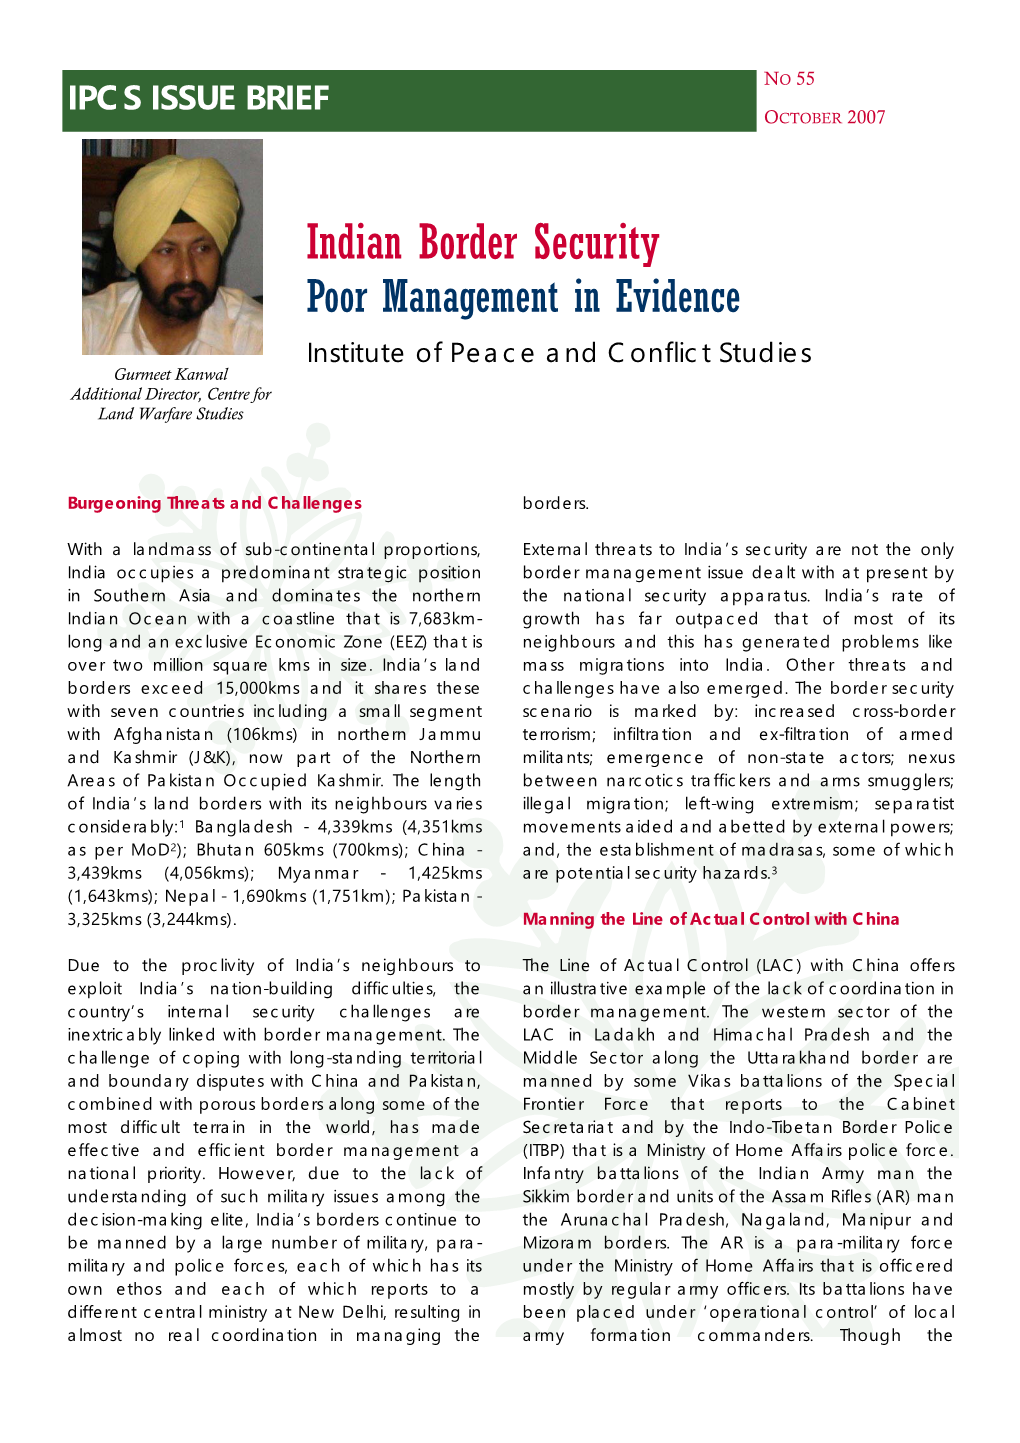 Indian Border Security: Poor Management in Evidence